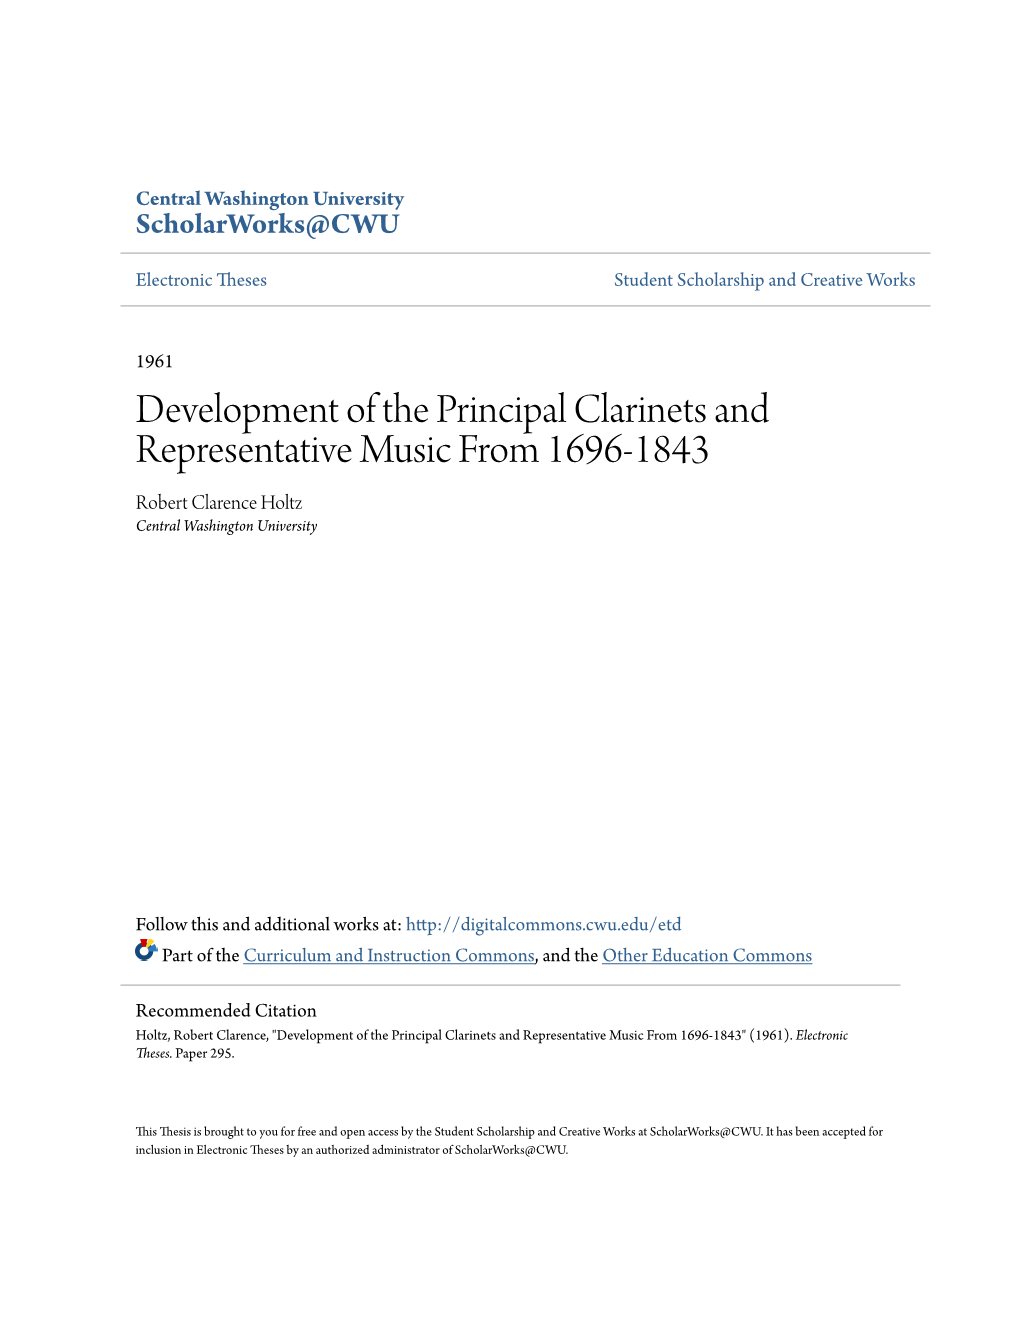 Development of the Principal Clarinets and Representative Music from 1696-1843 Robert Clarence Holtz Central Washington University